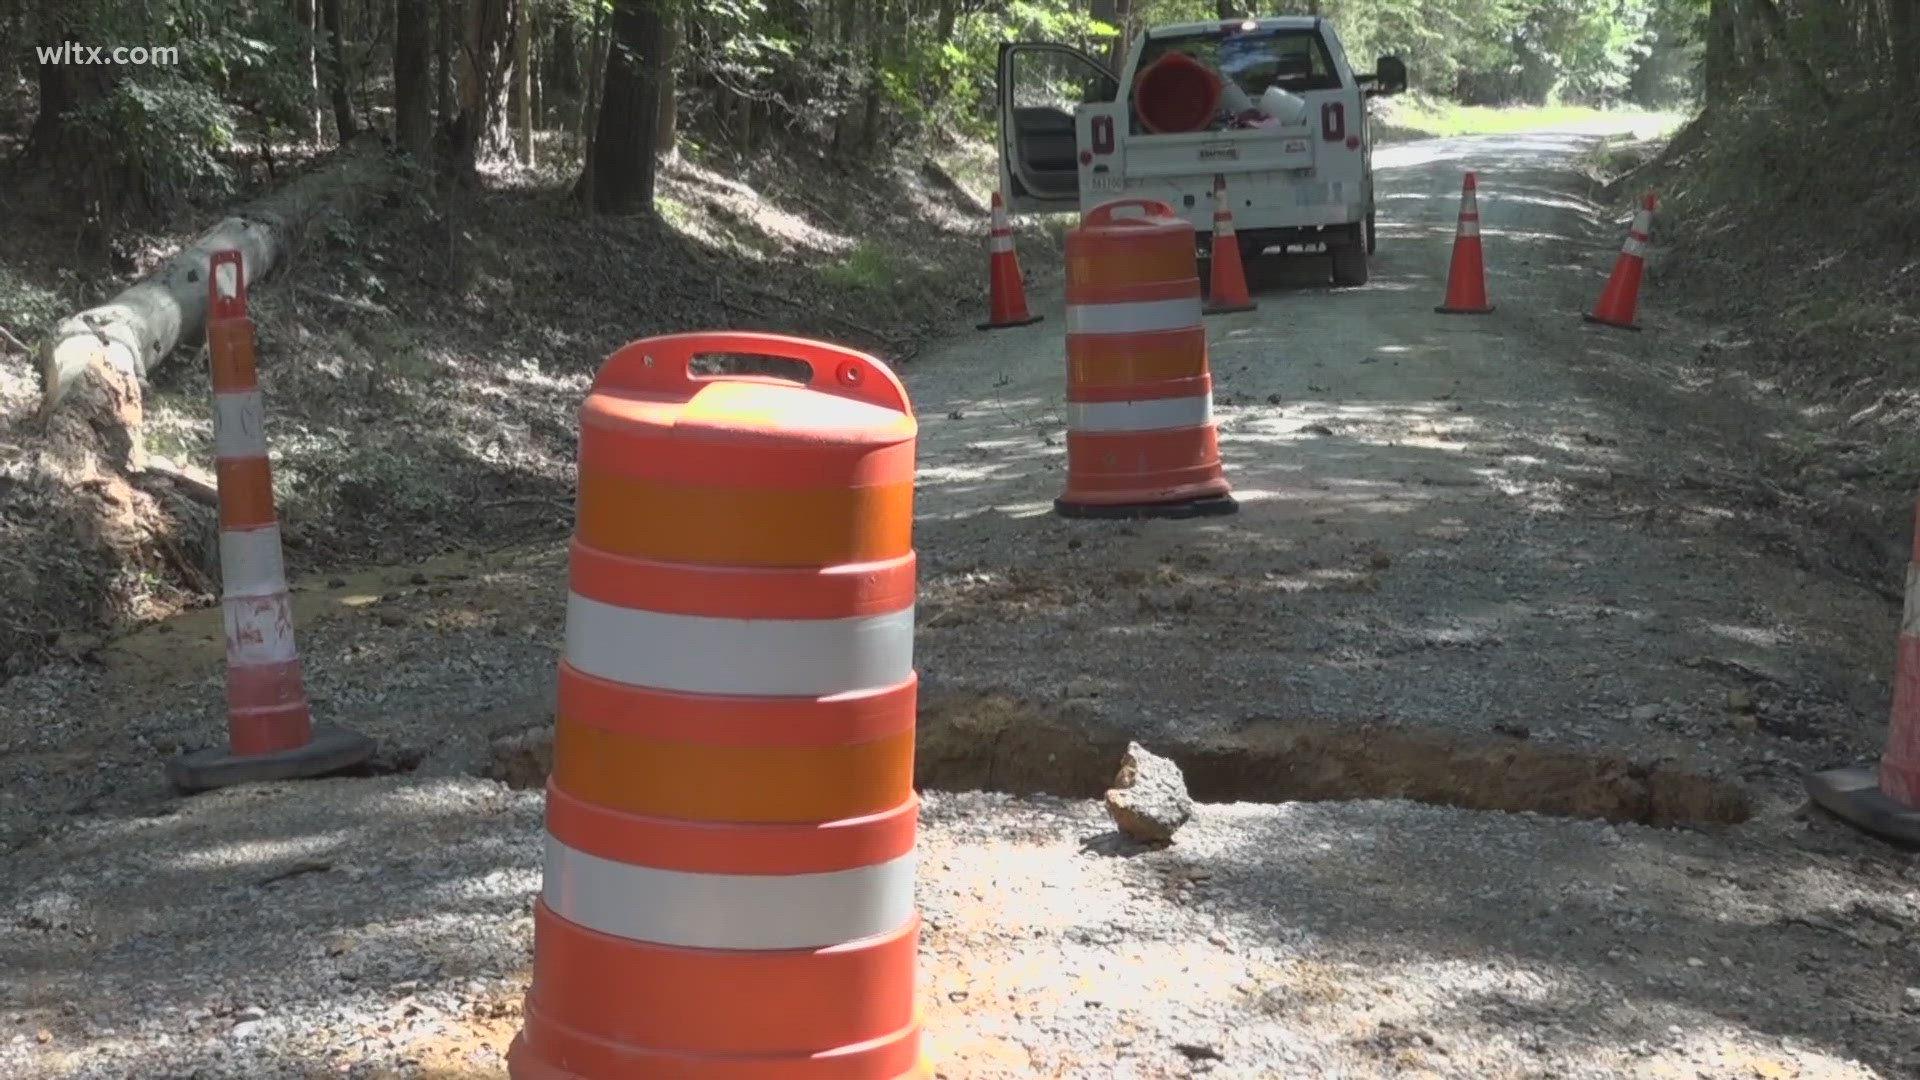 A water main break along Bear Creek Road, off Amicks Ferry Road, left a number of residents without water on the Fourth of July.